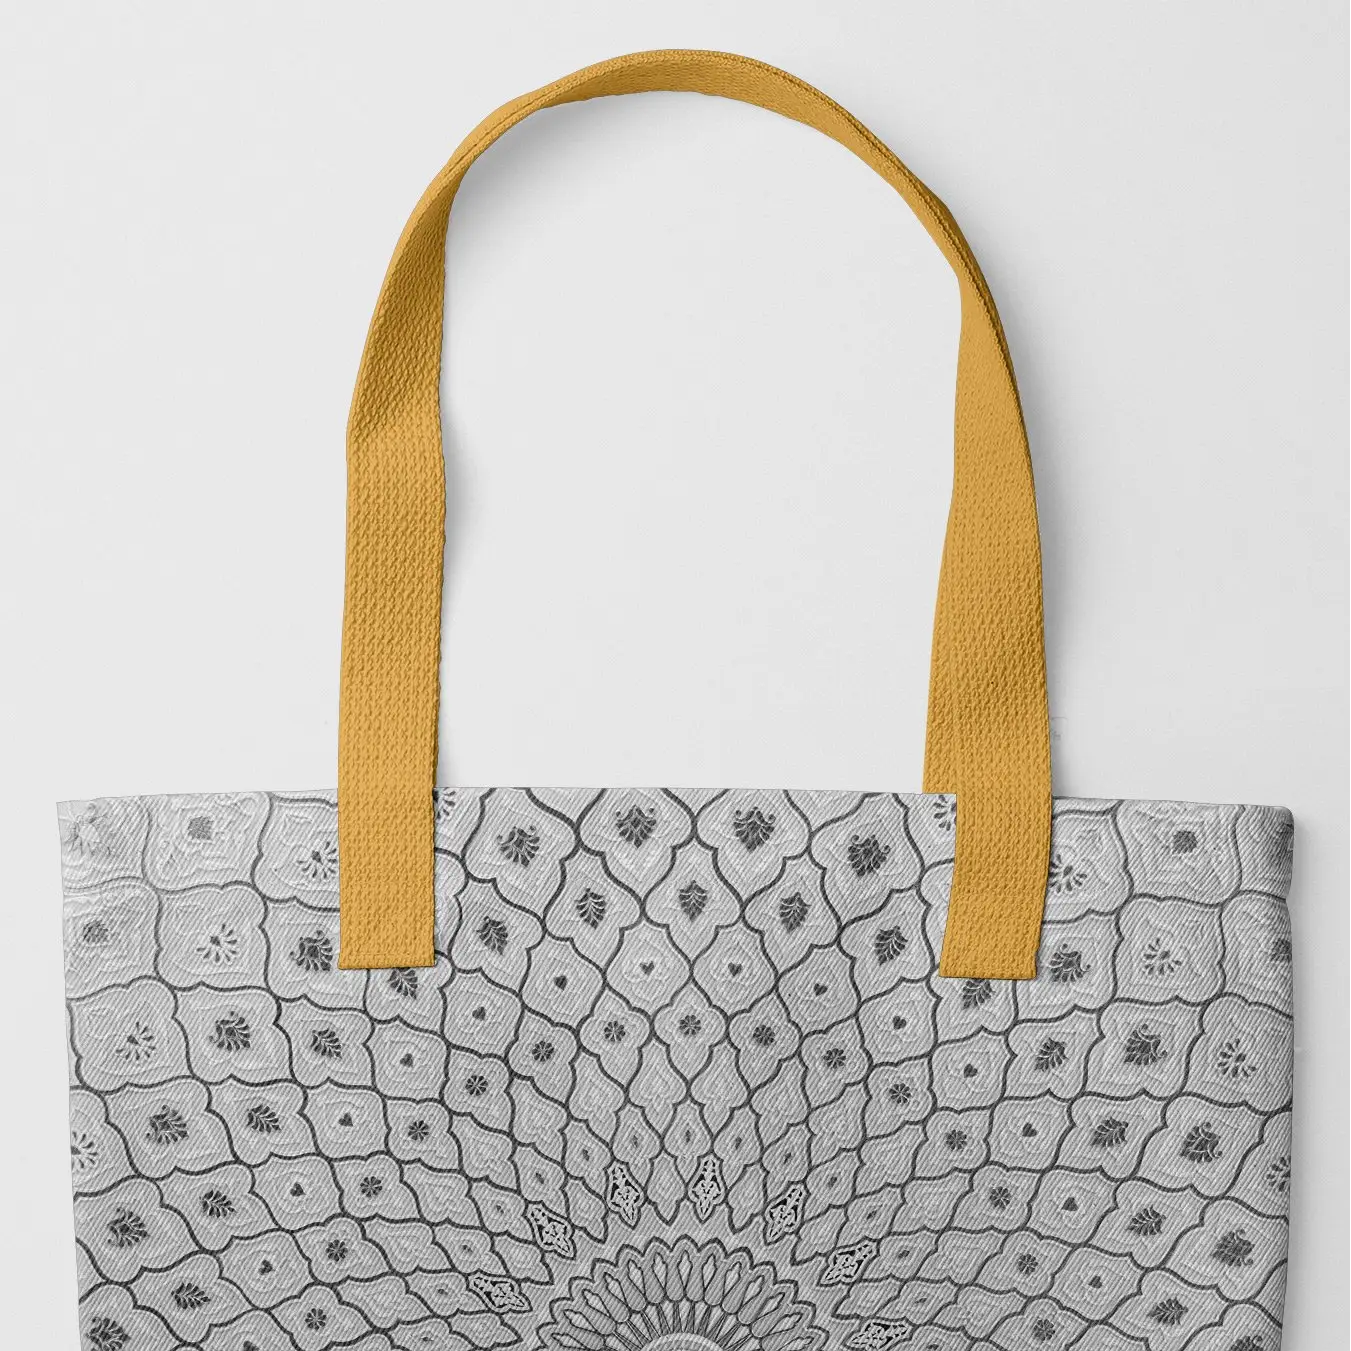 Divine Order Shopping Tote - Black And White Islamic Pattern - Yellow Handles - Tote Bags - Aesthetic Art